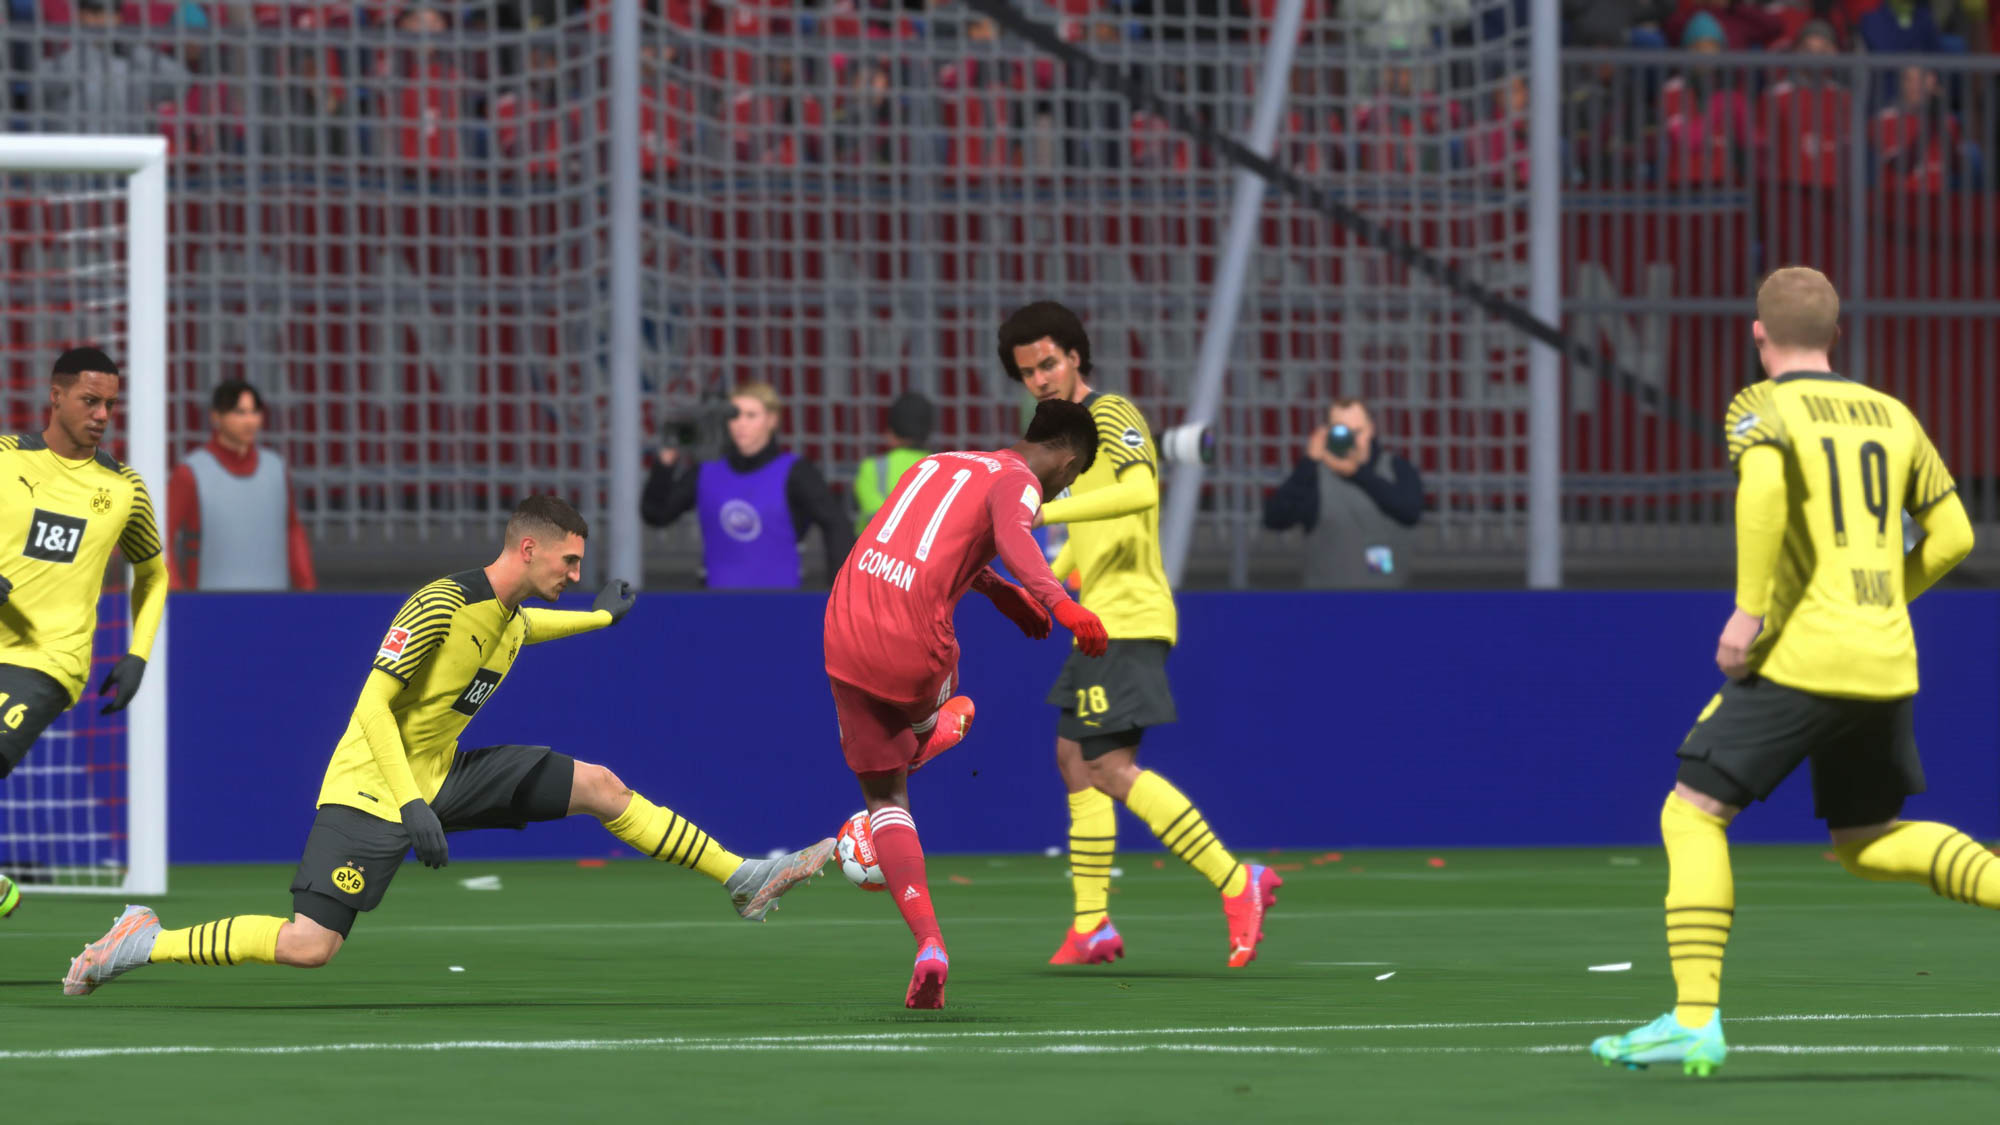 FIFA 22 review: A new era of gameplay